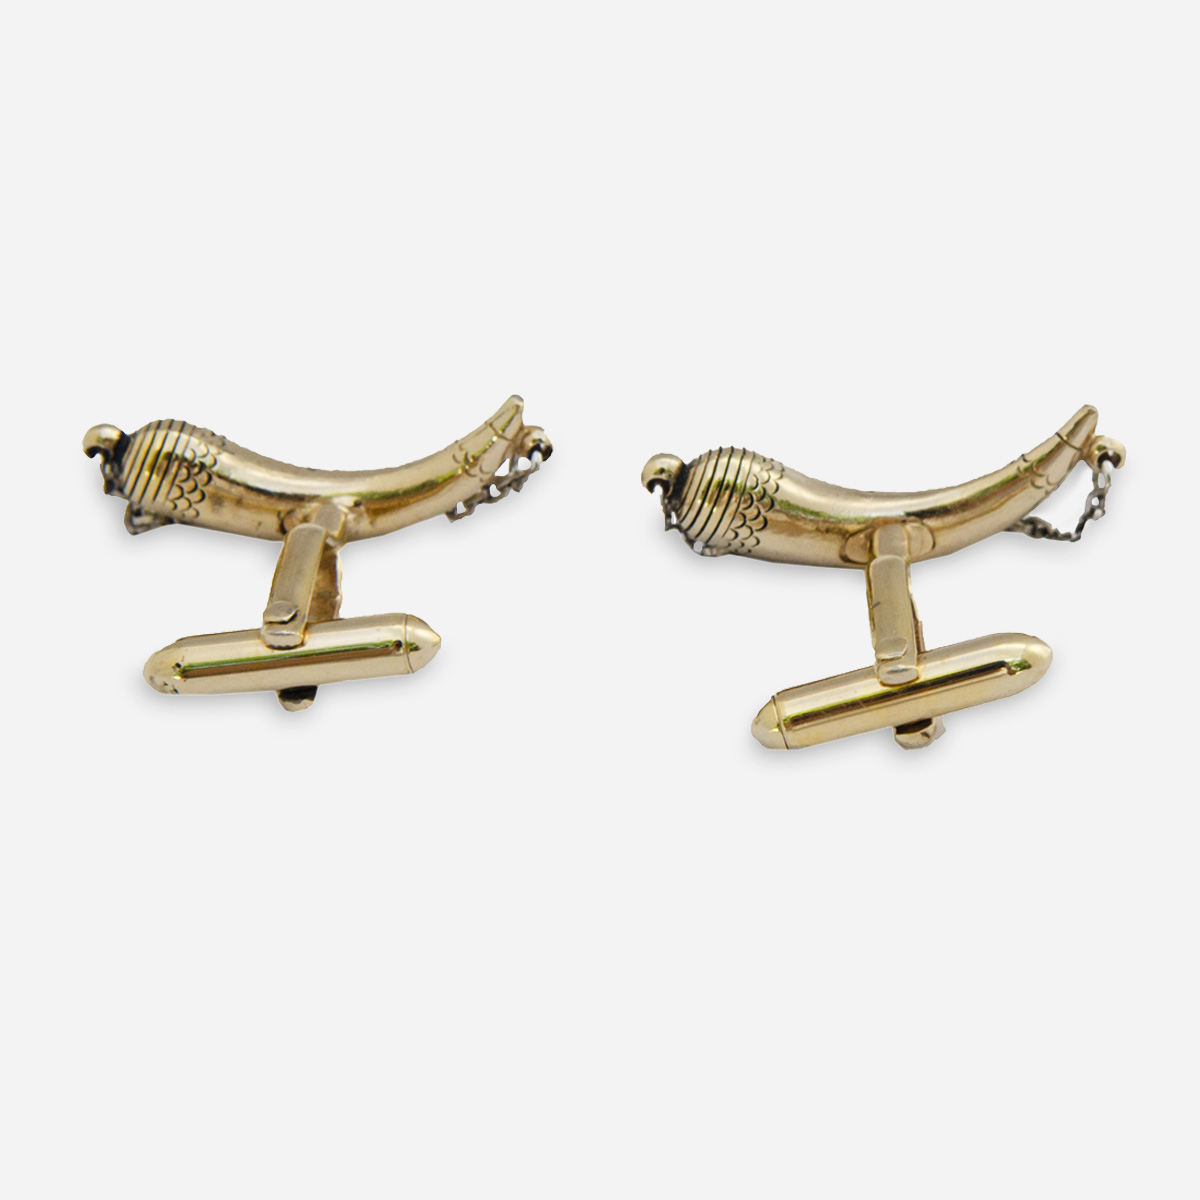 Gold bullet and toggle cuff links